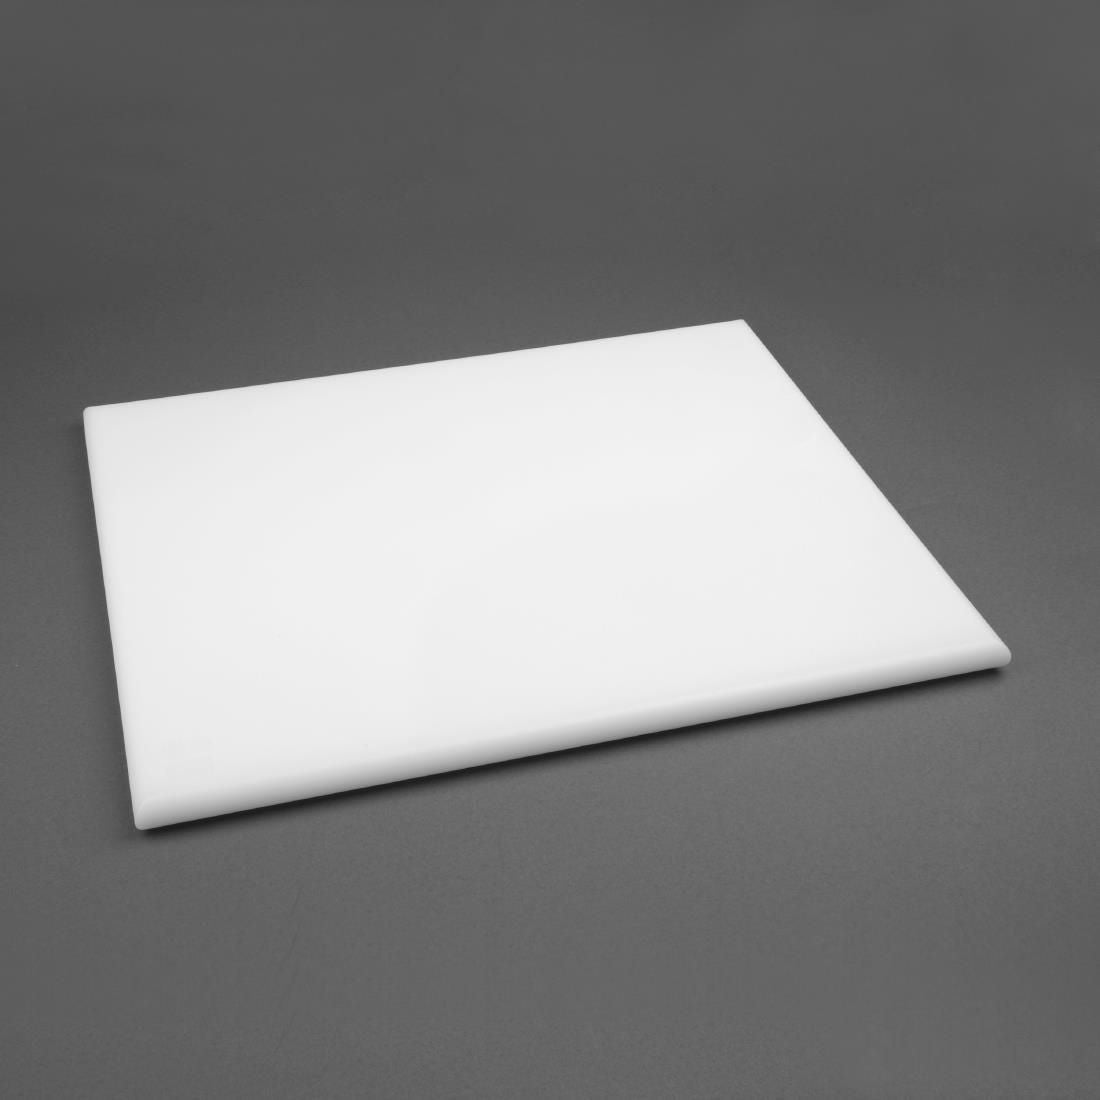 Hygiplas Extra Thick High Density White Chopping Board Large JD Catering Equipment Solutions Ltd